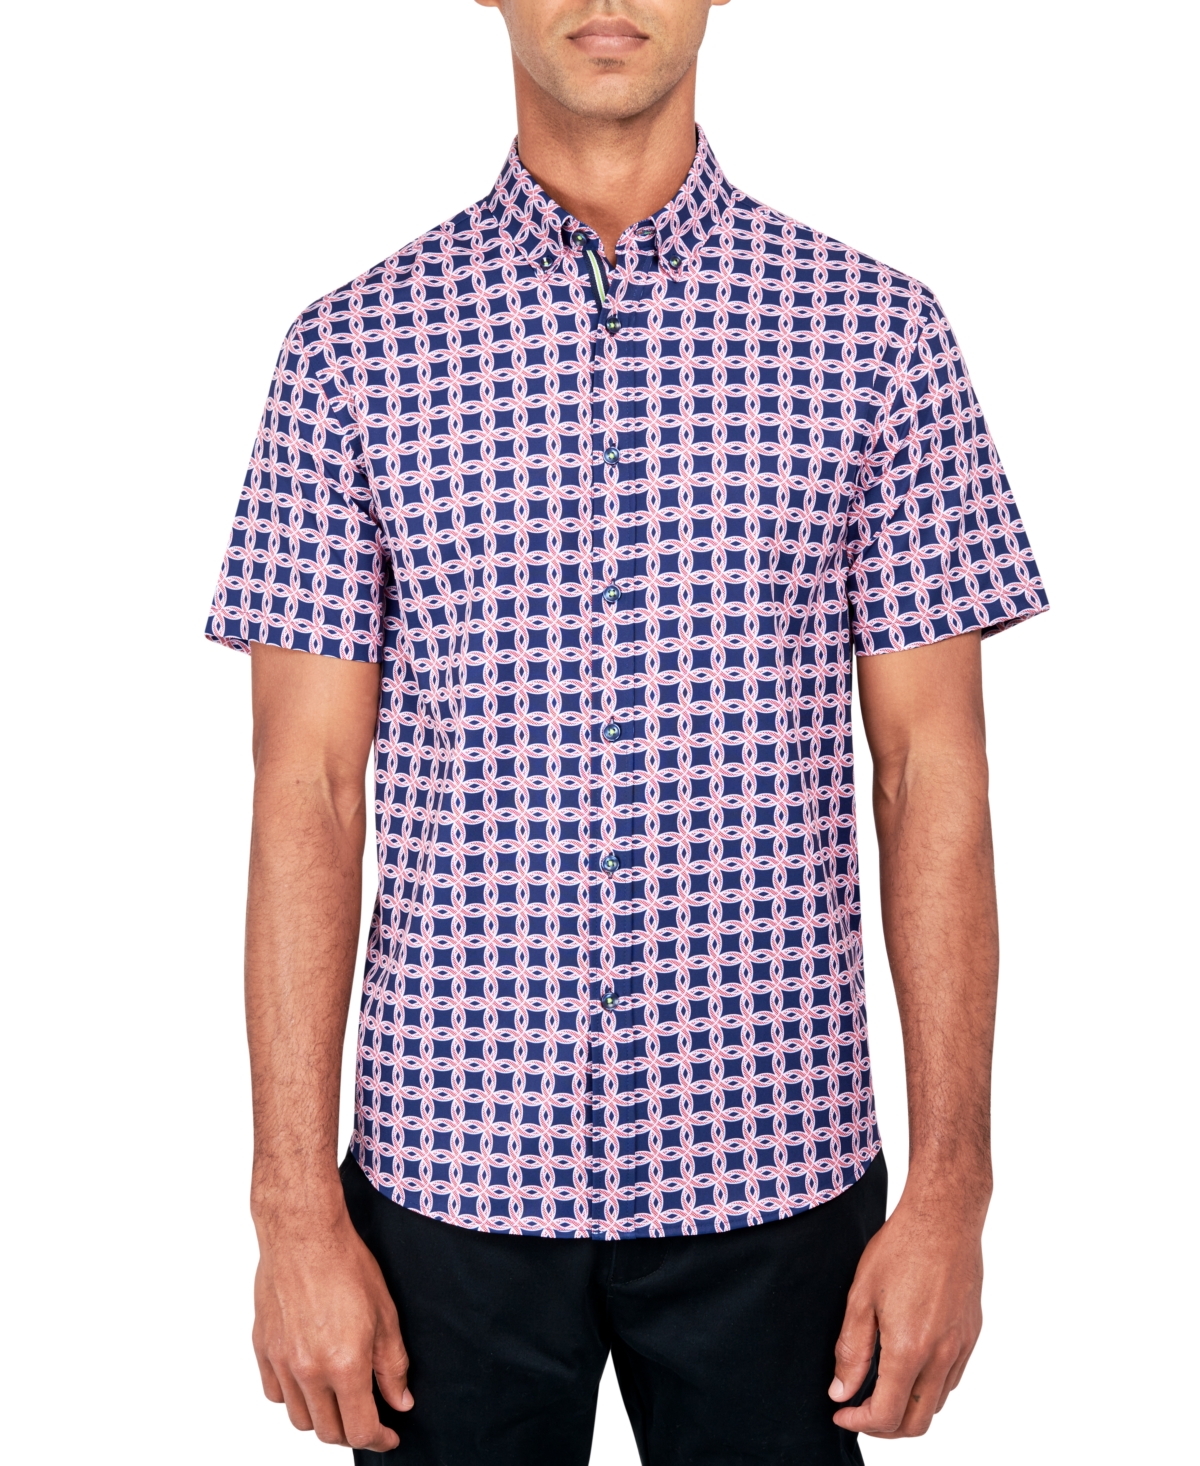 Men's Regular-Fit Non-Iron Performance Stretch Linked Circle-Print Button-Down Shirt - Red